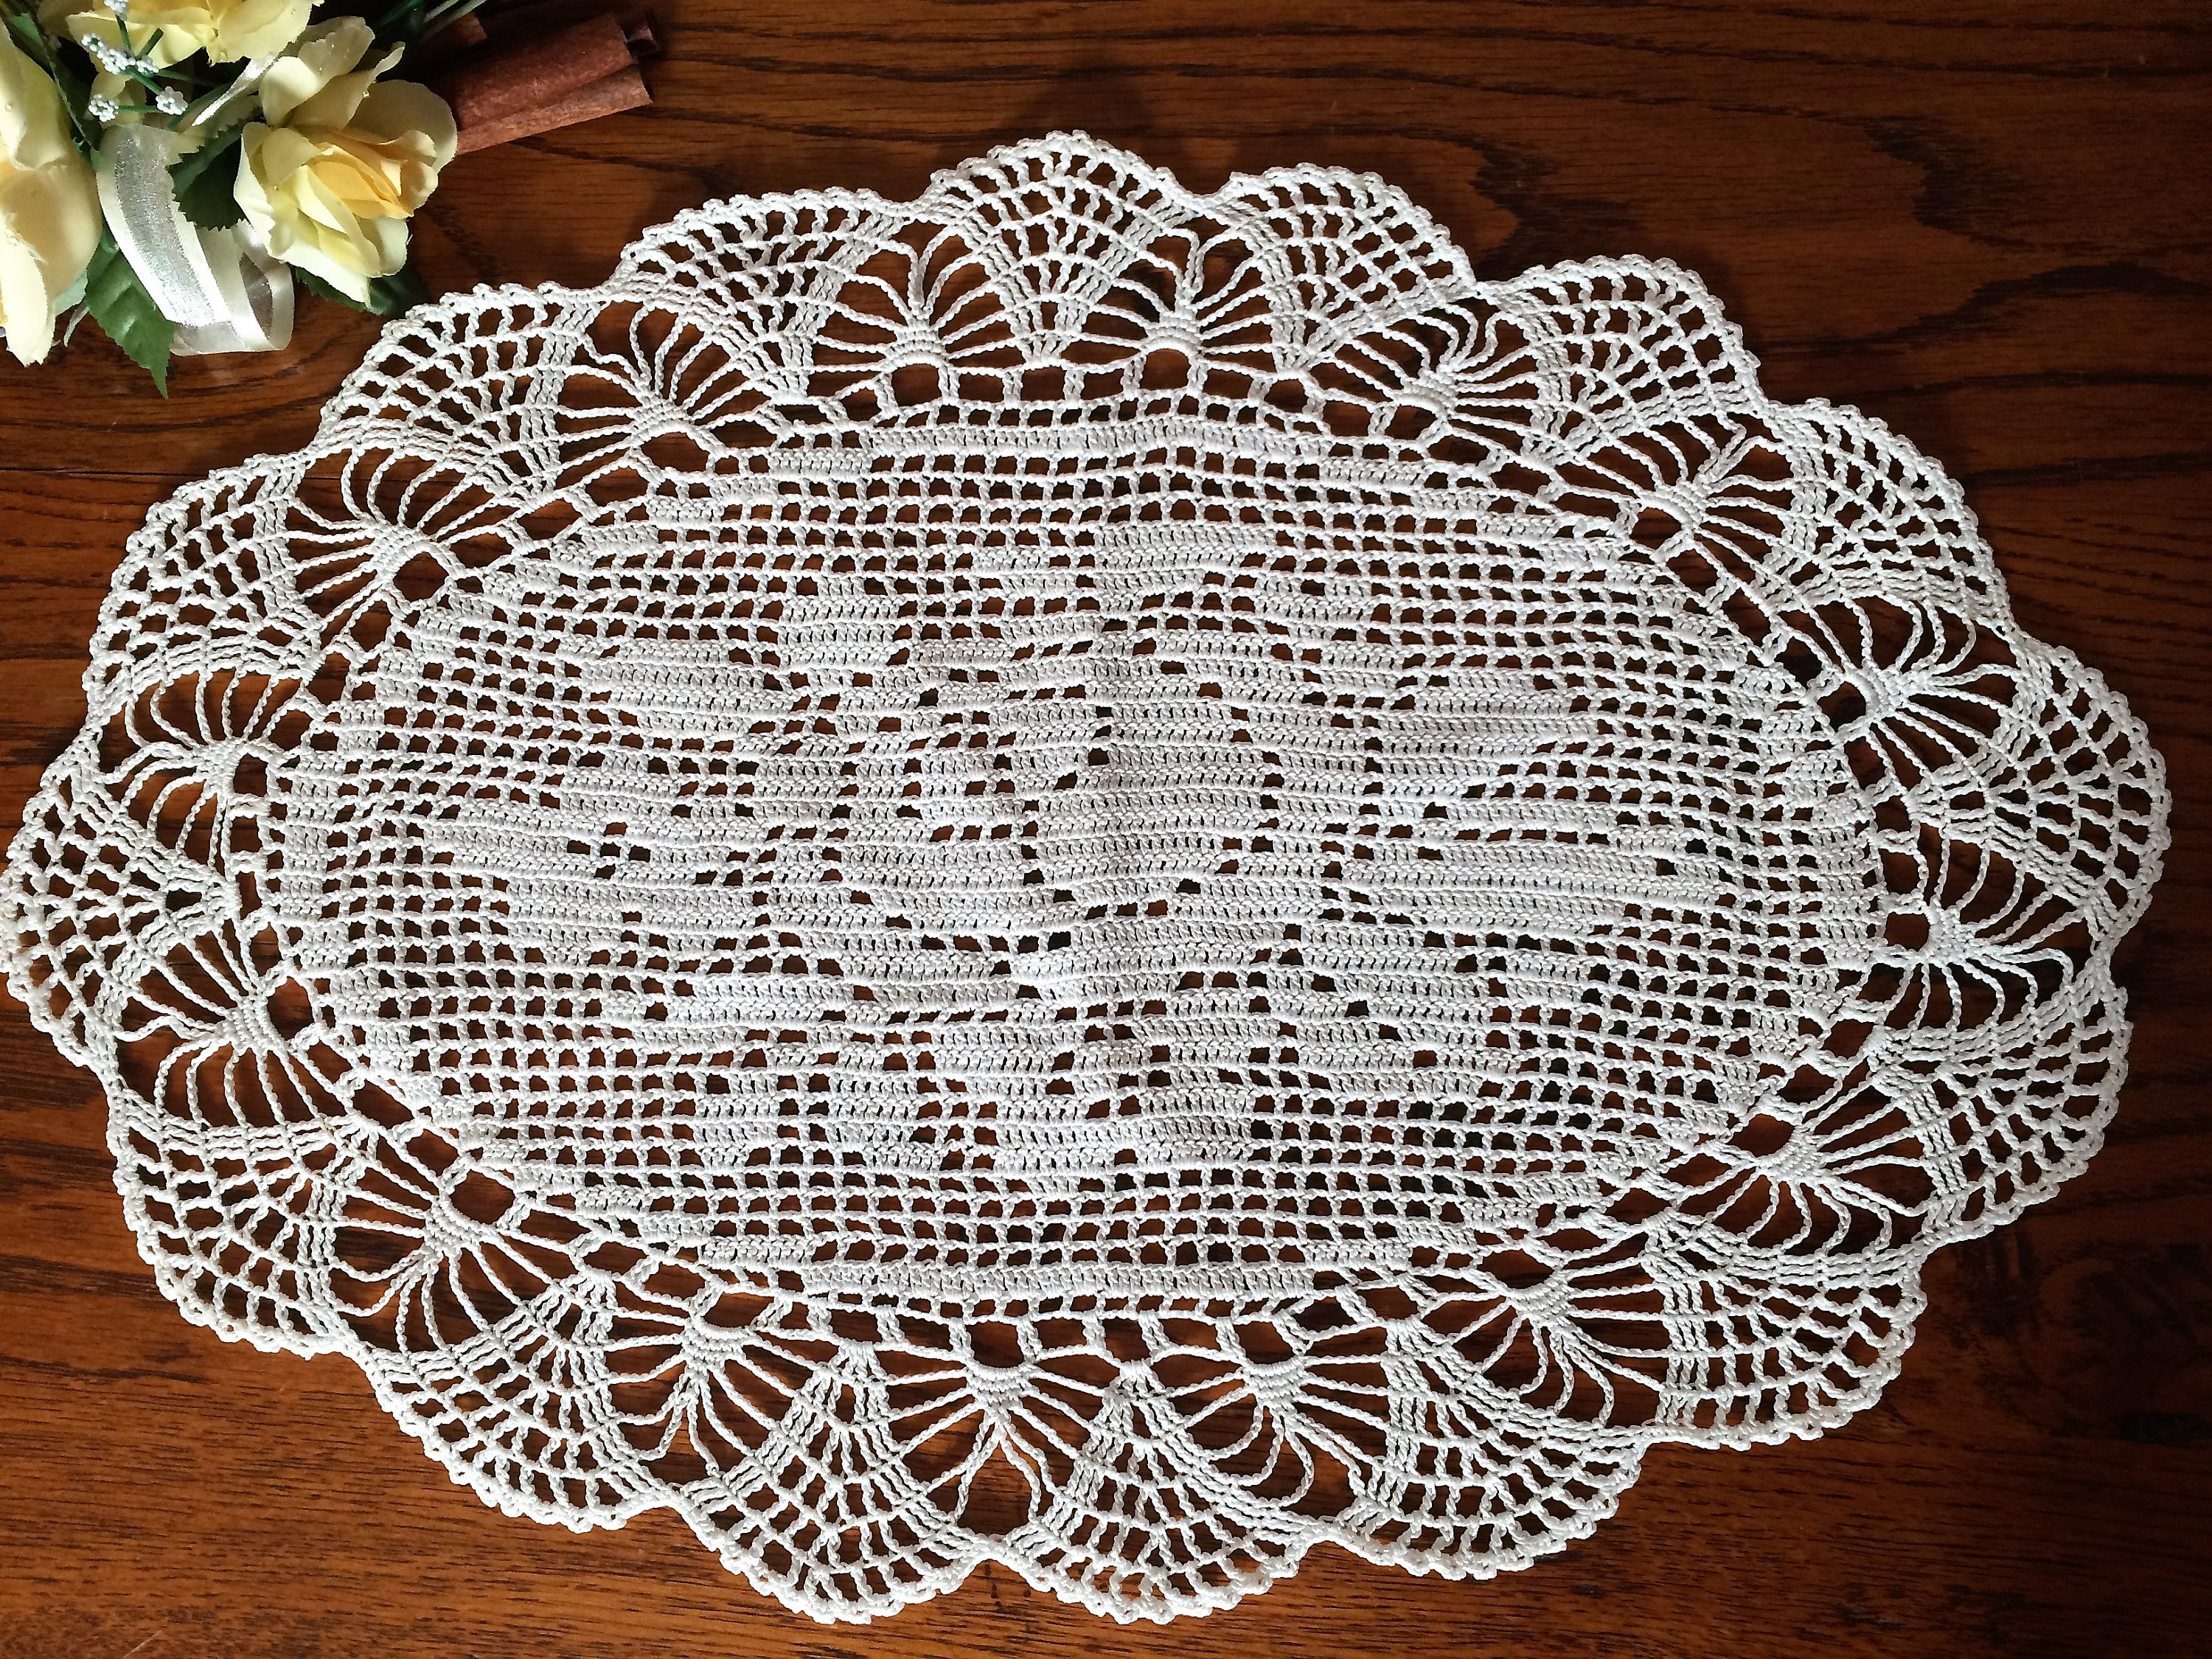 Free Crochet Oval Tablecloth Patterns Vintage Lace Oval Doily Or Table Runner Oval Filet Crochet Doily